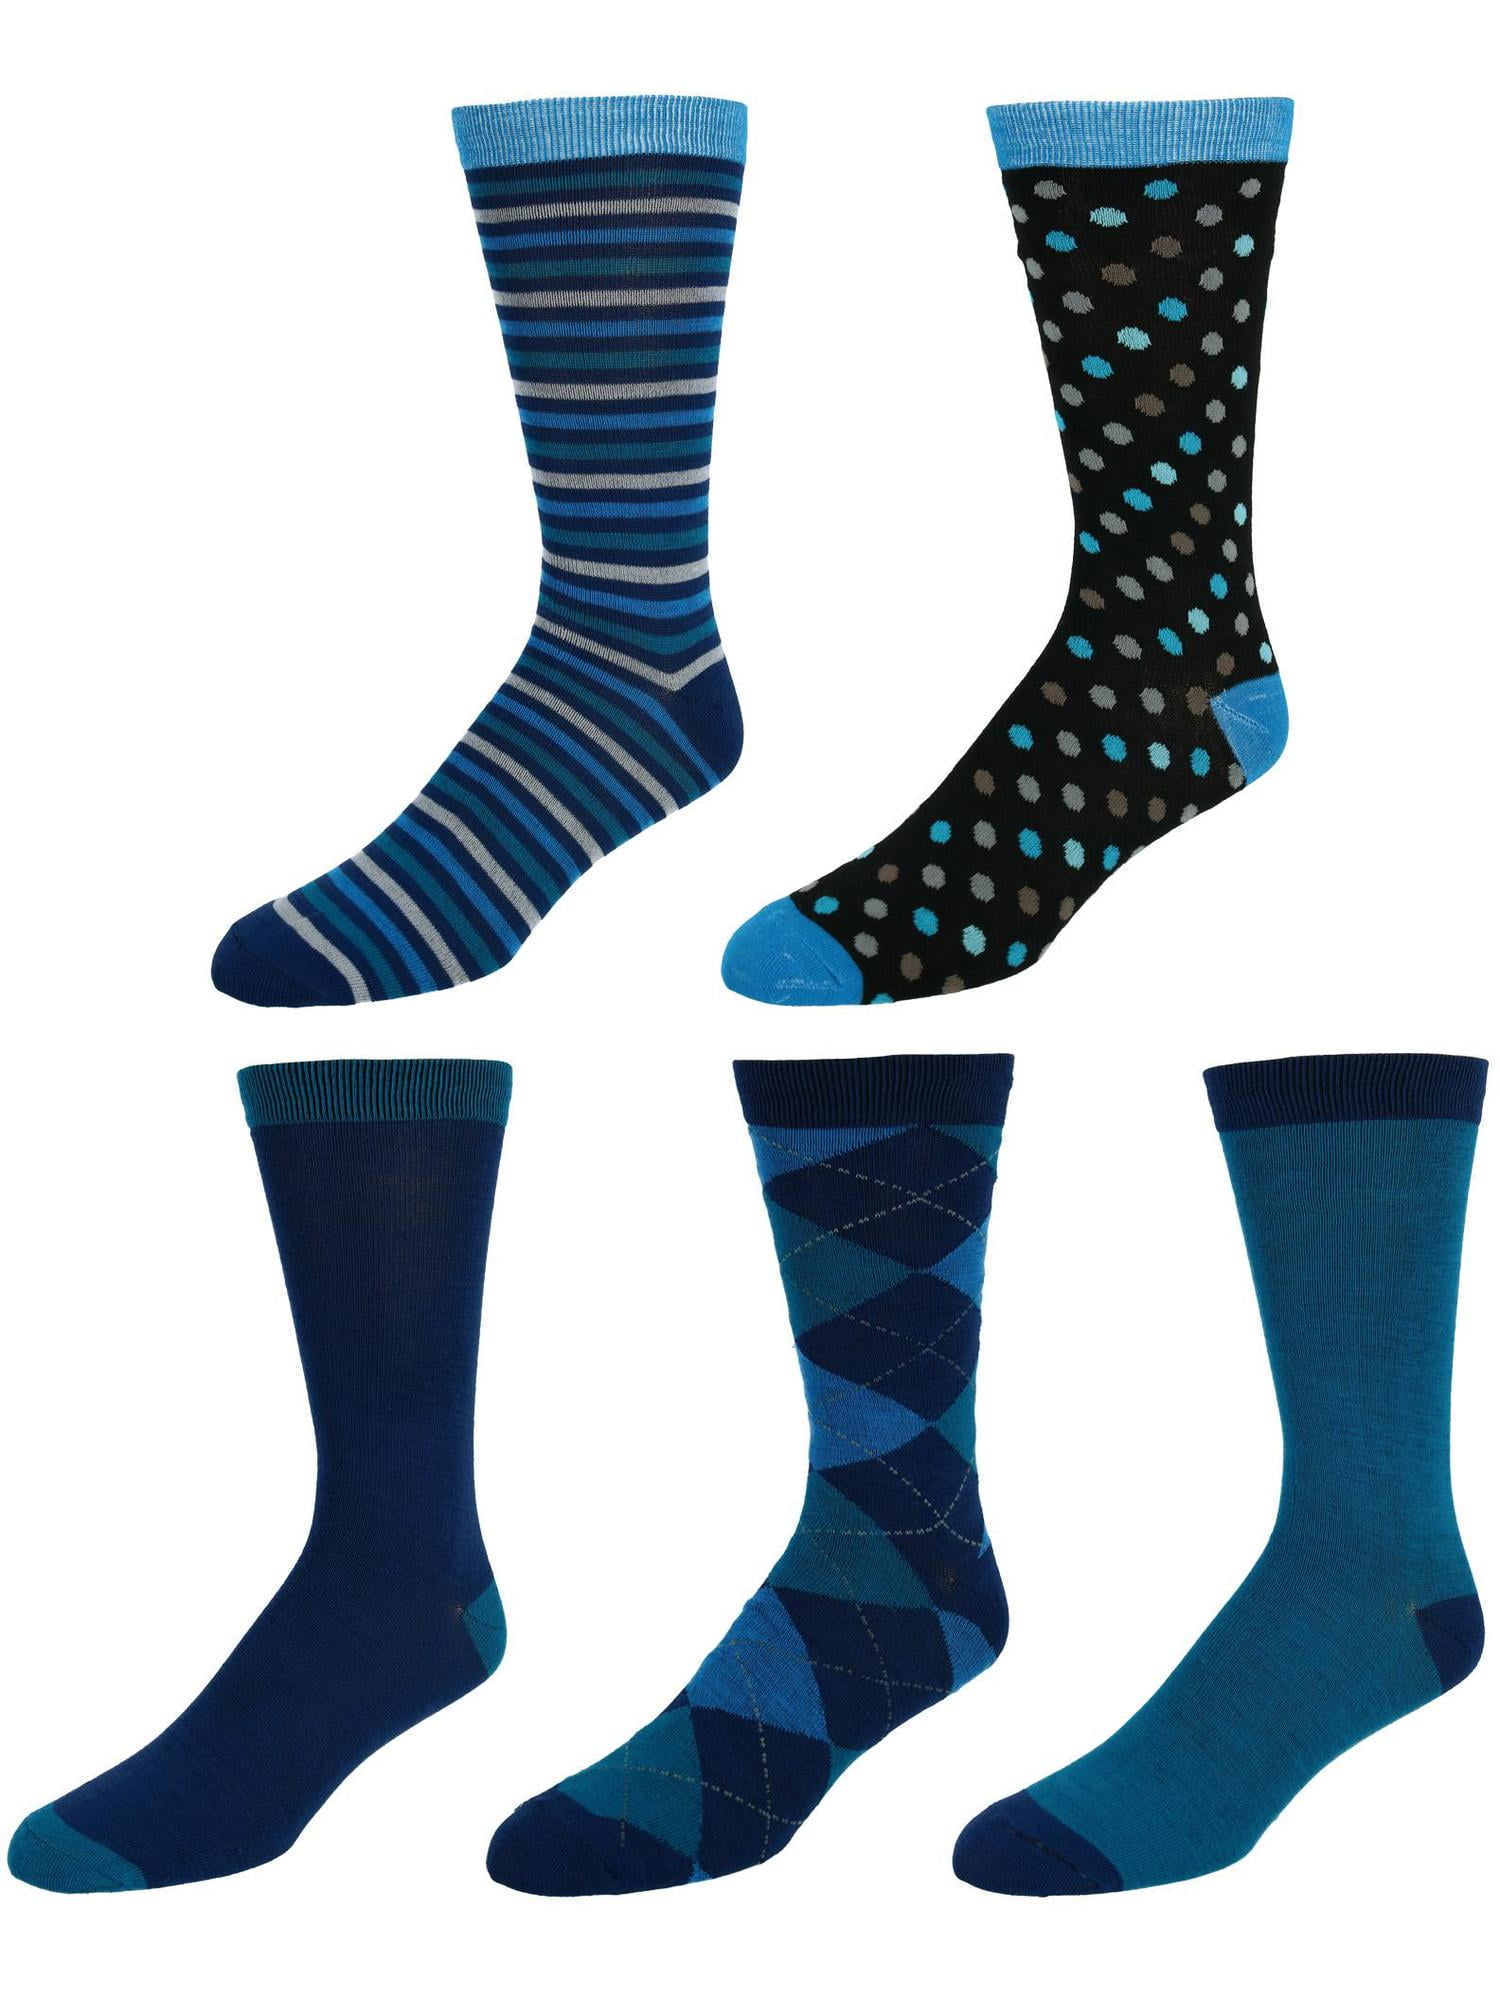 JustOne - Just One Dress Socks Argyle Stripes Dots Solids (5 Pair Pack ...